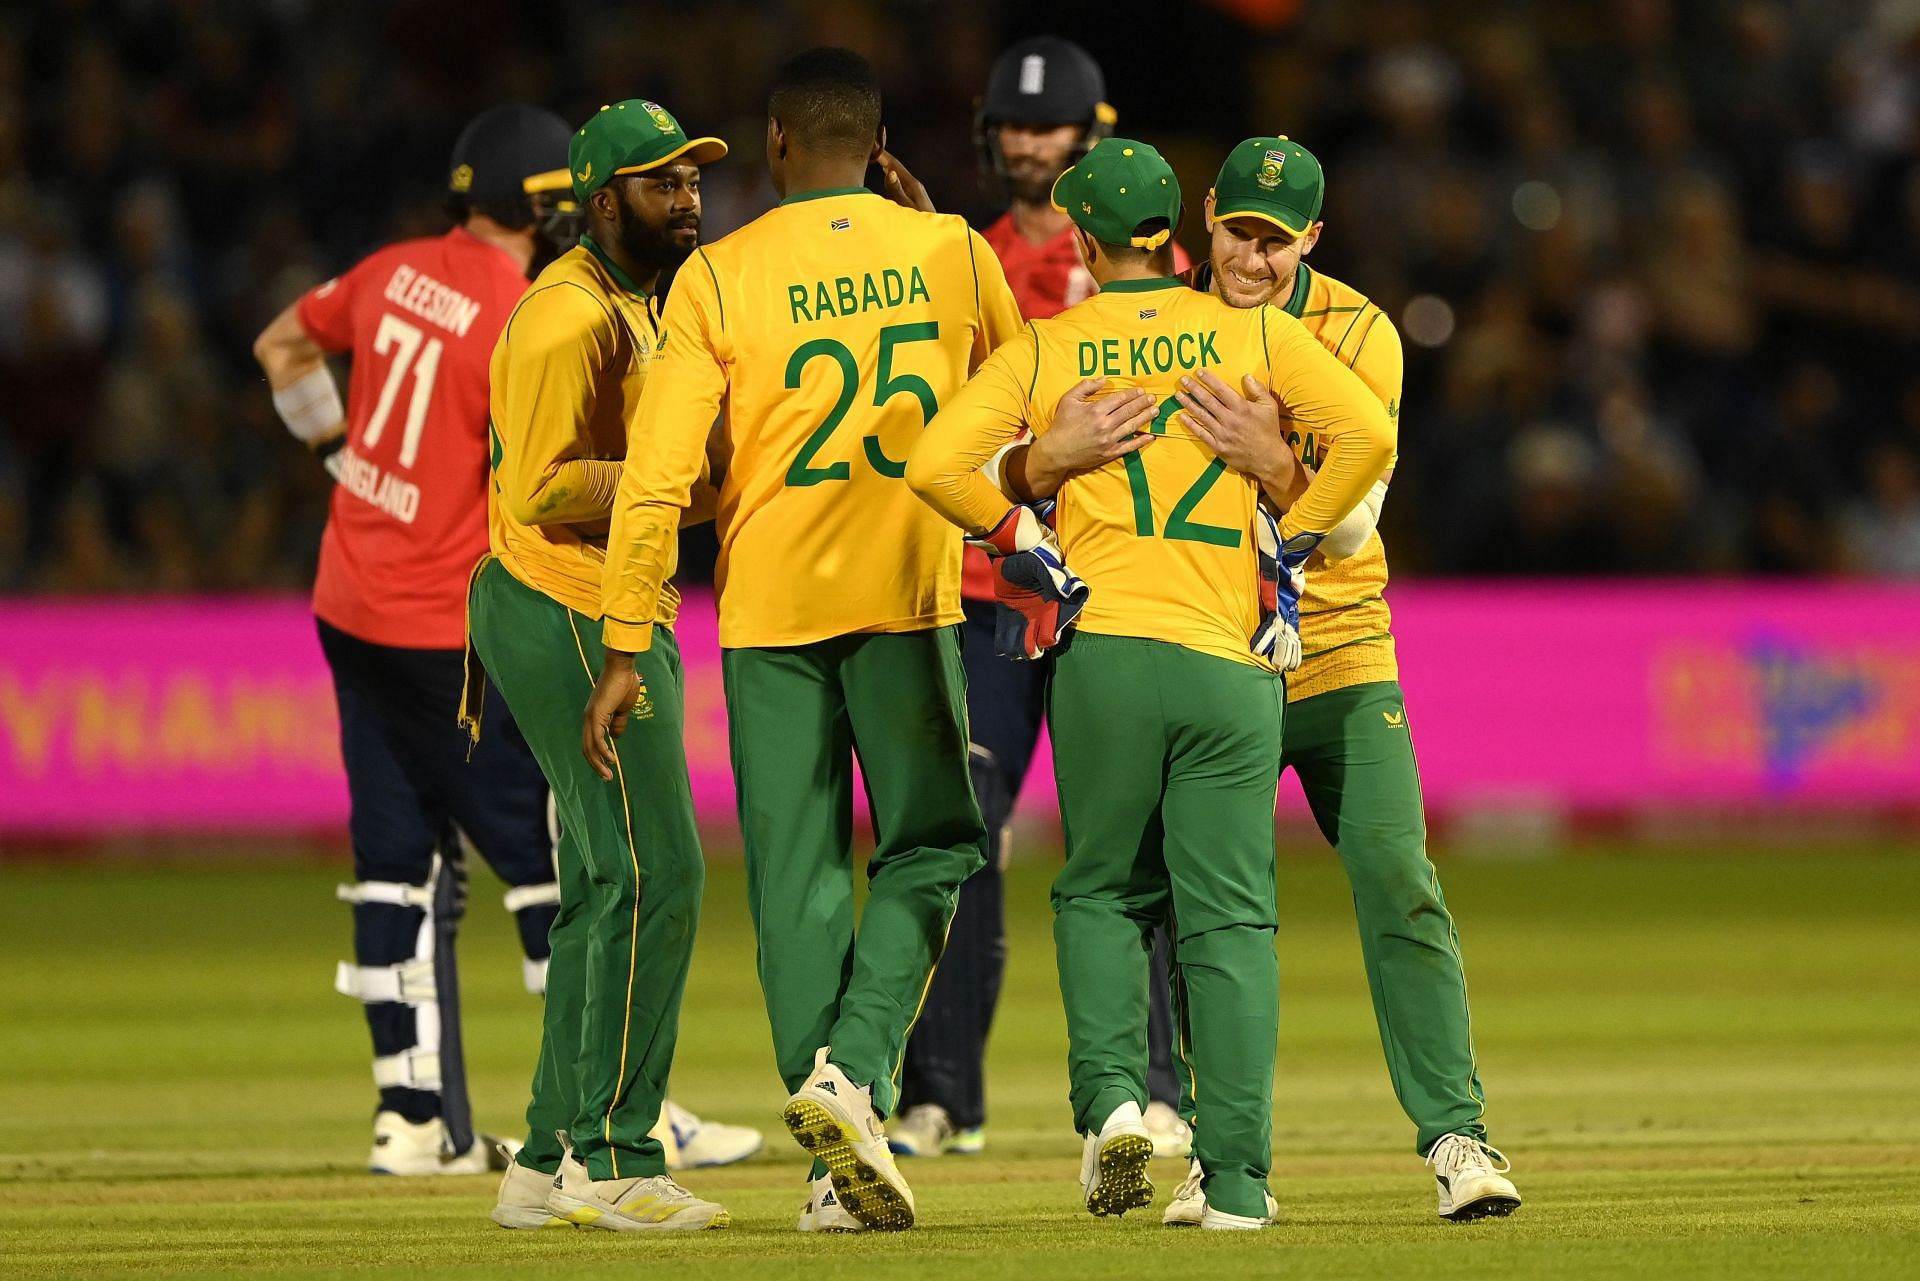 South Africa will look to take a 2-0 series lead against Ireland.